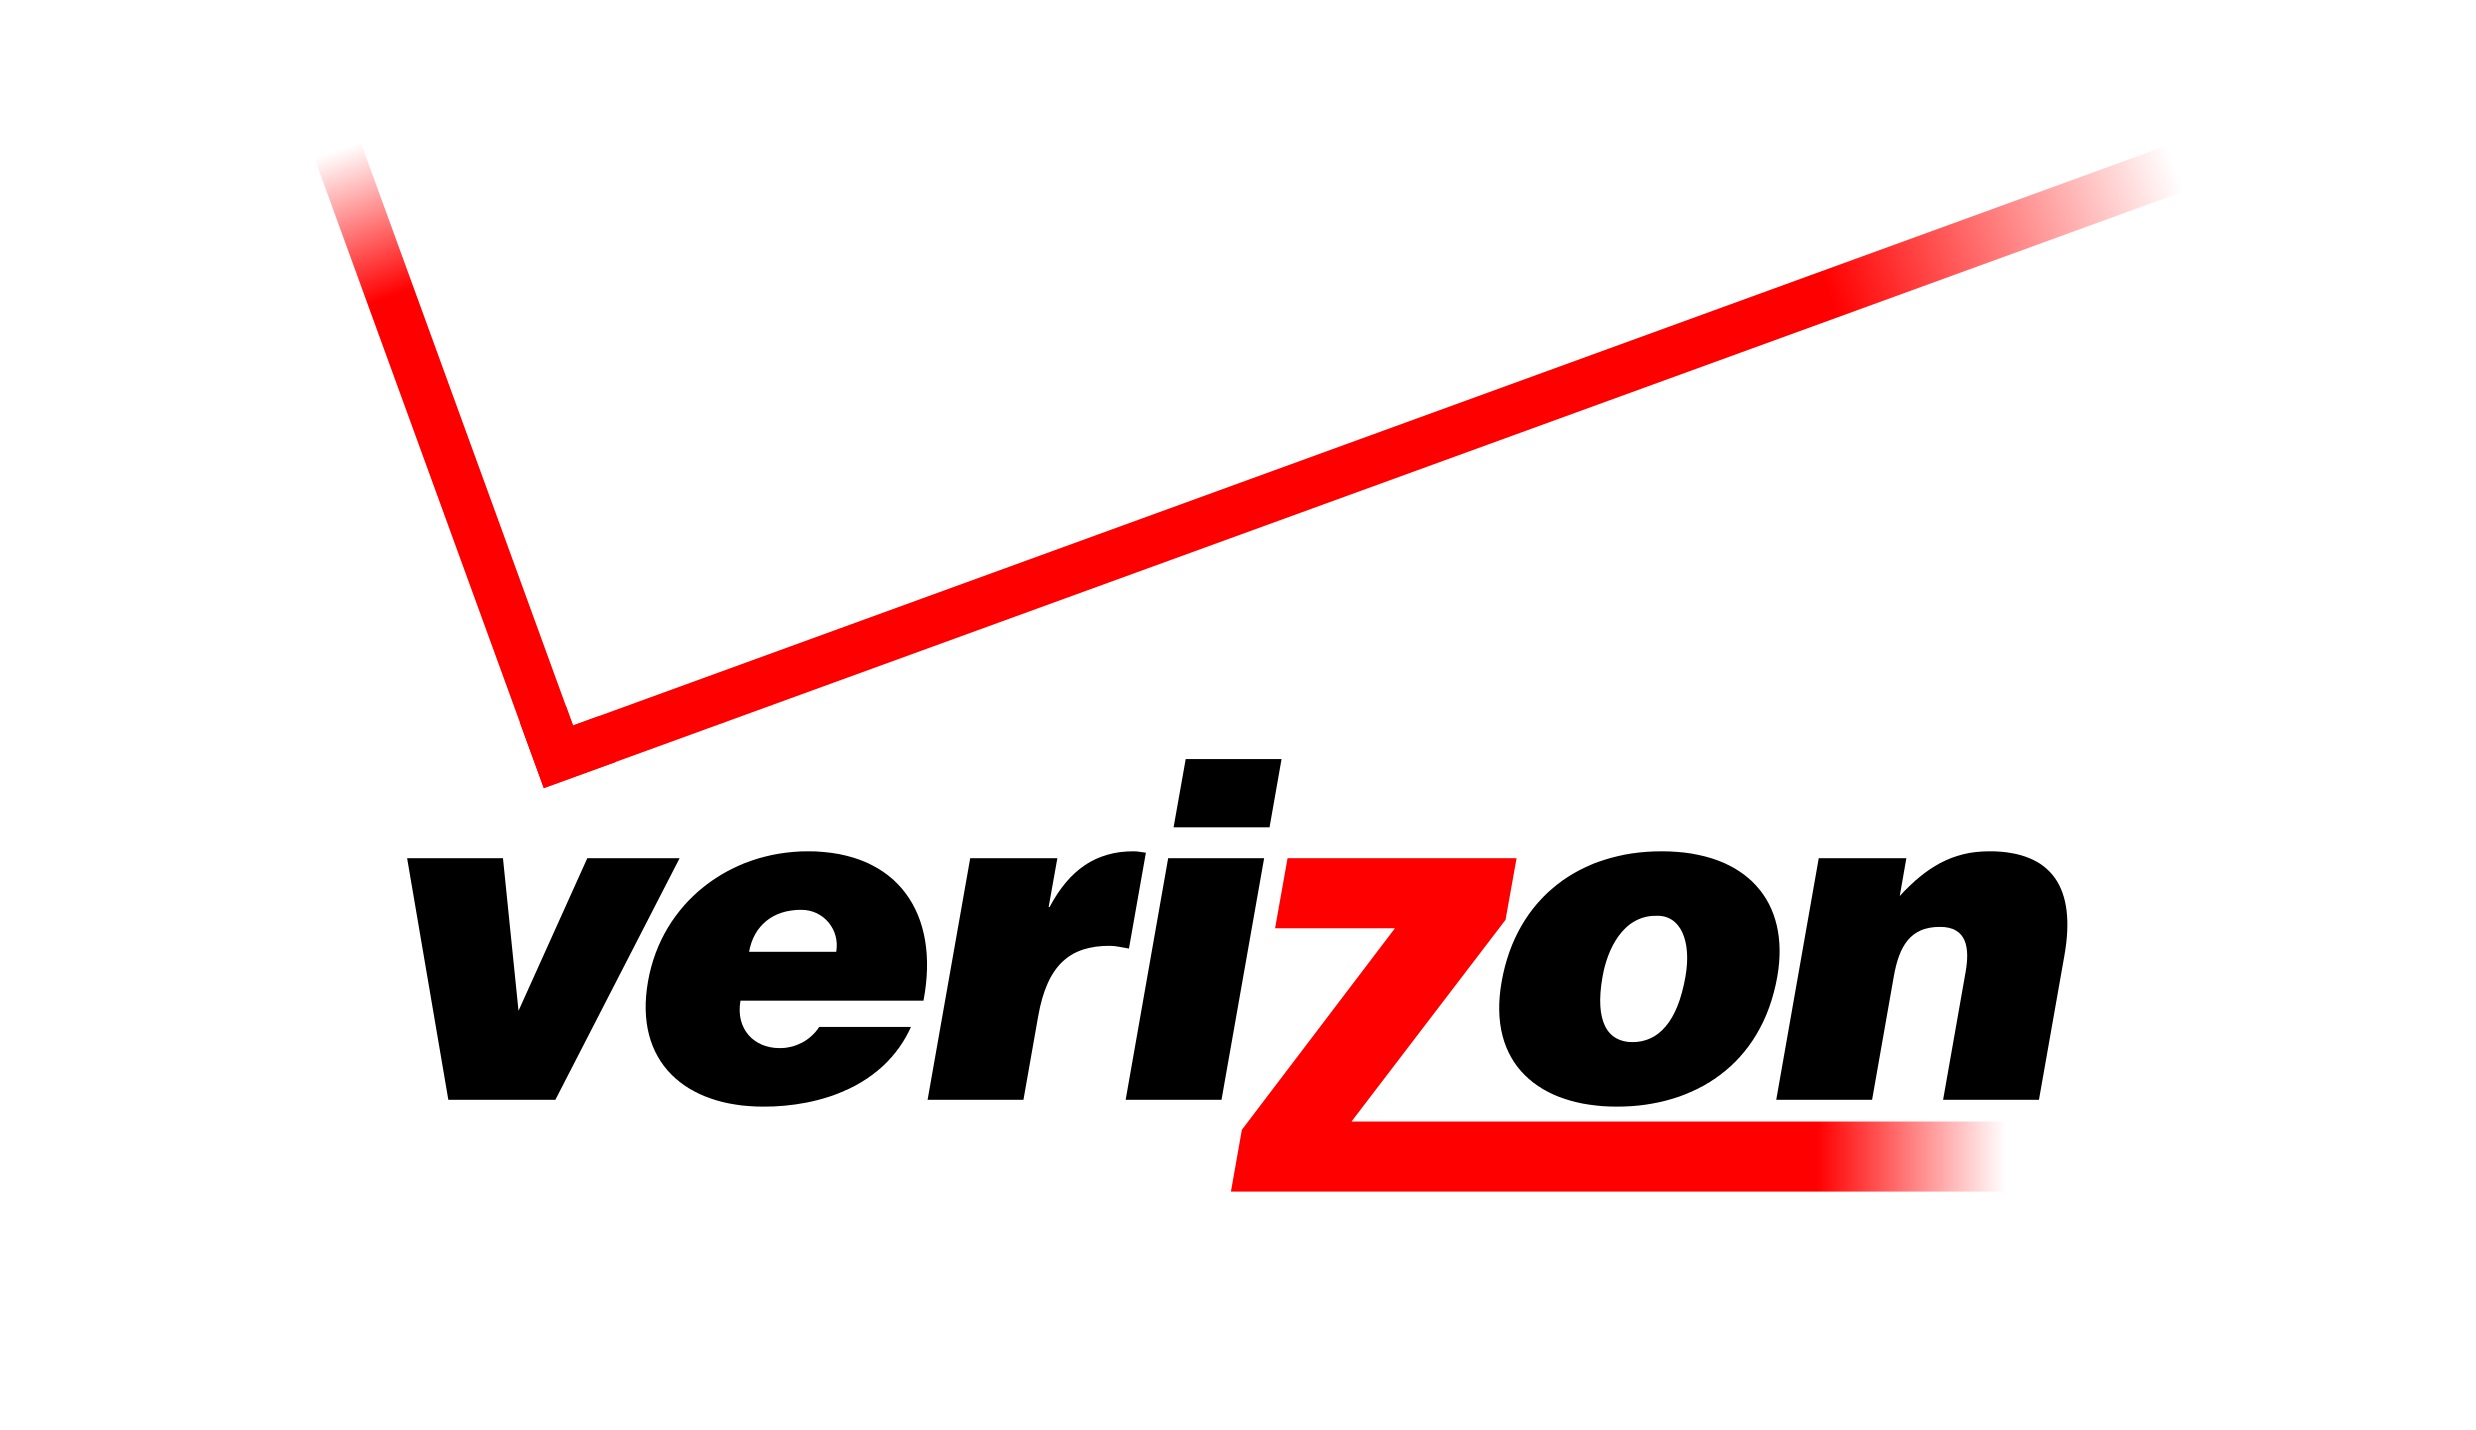 Verizon Launches PopData to Join Unlimited Data Party, Sort Of